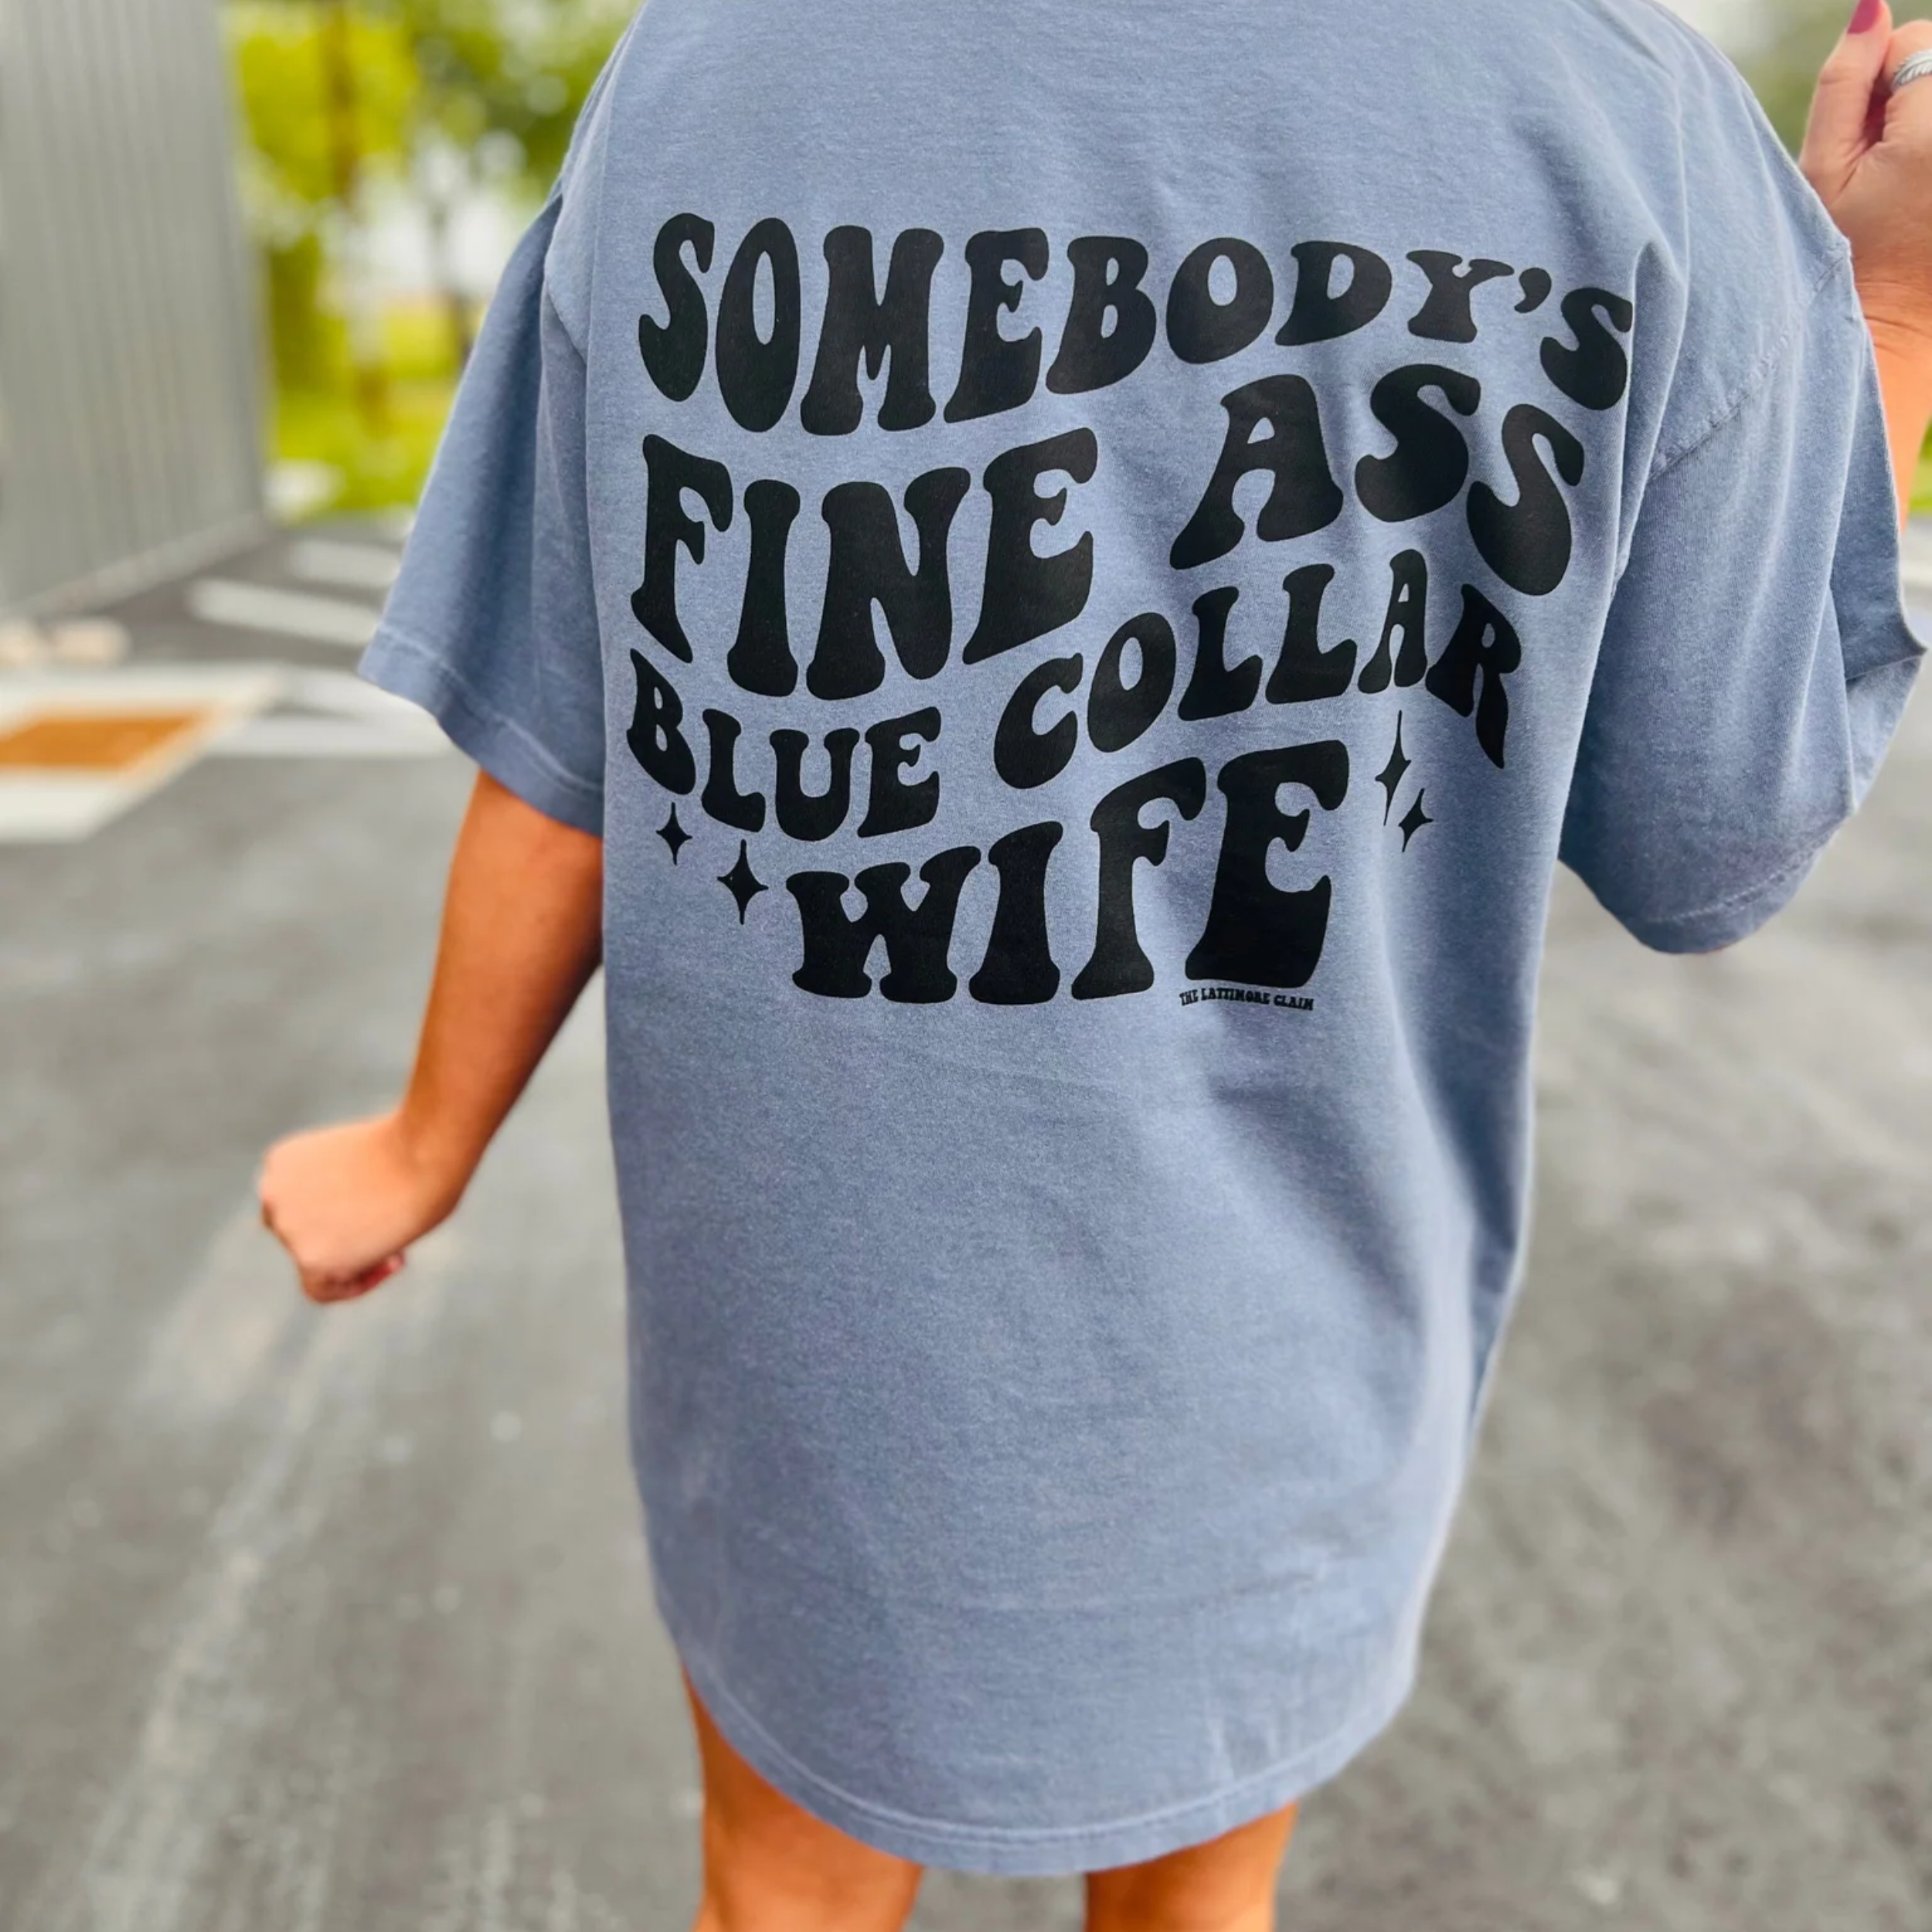 Online Exclusive | Somebody's Fine Ass Blue Collar Wife Short Sleeve Graphic Tee in Khaki - Giddy Up Glamour Boutique